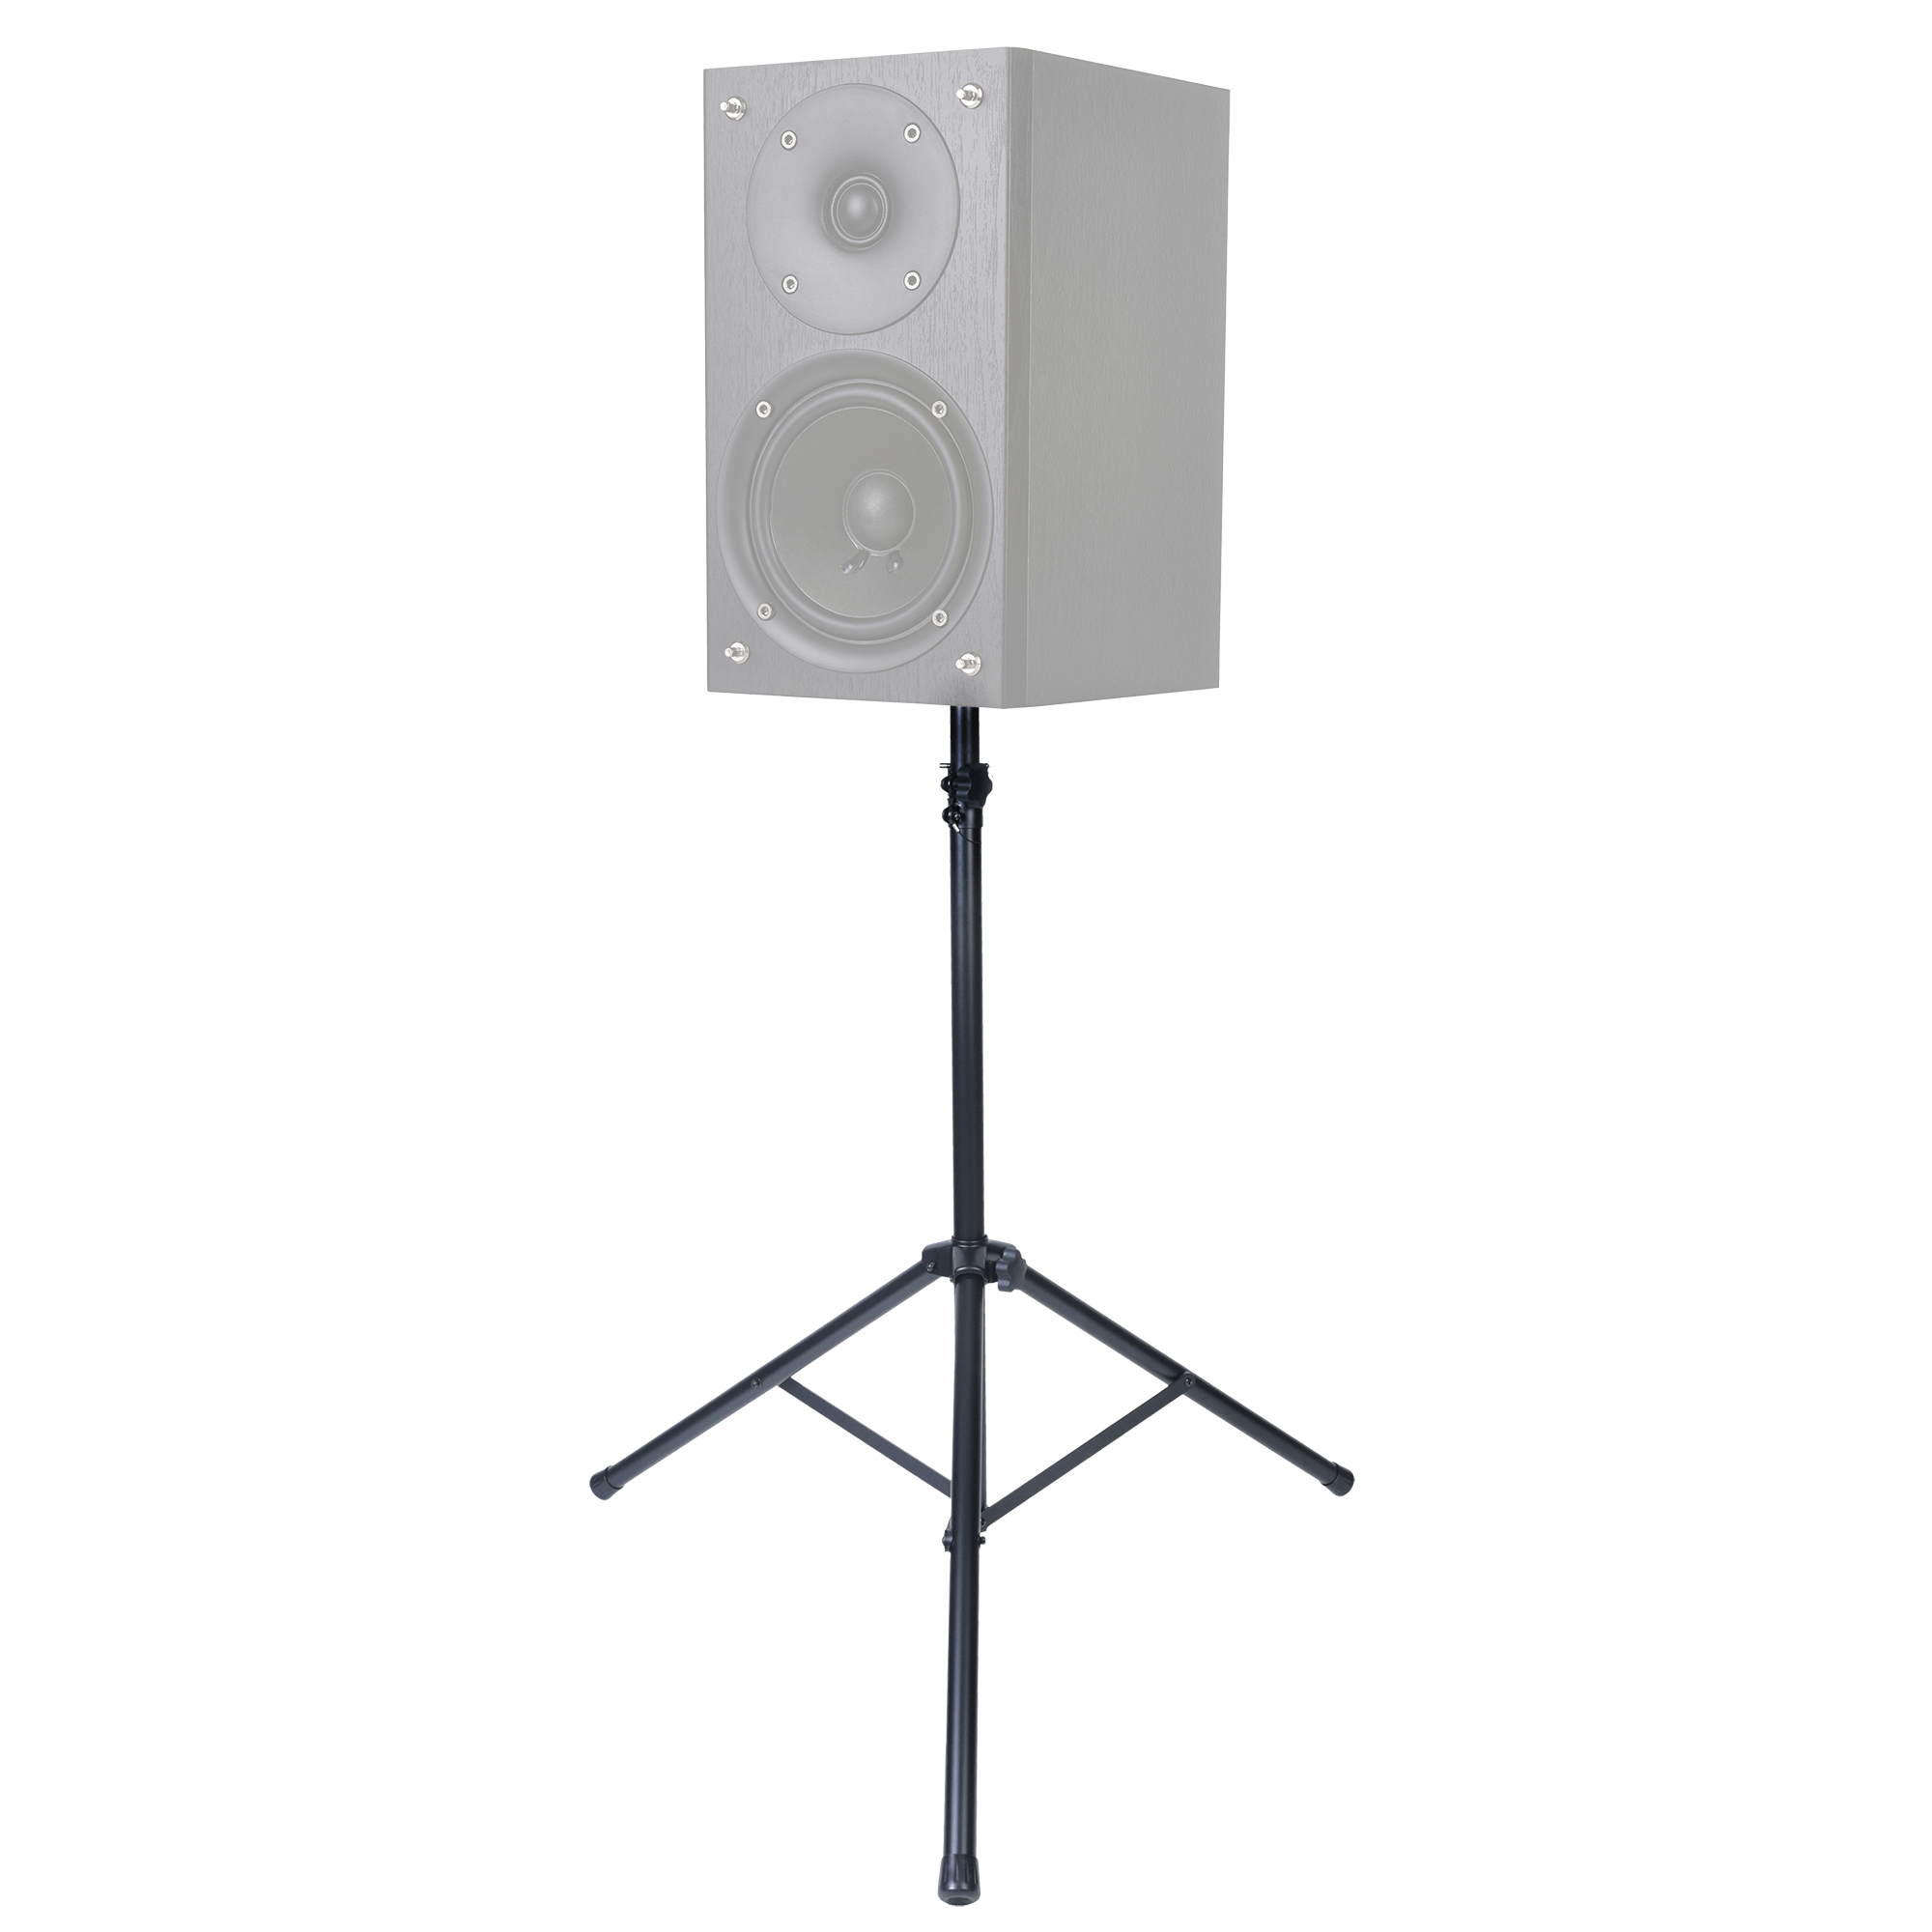 4 PACK of Universal Speaker Stands 6.65 ft • Adjustable Height from 46 in to 80 in • Rated at 150 pounds